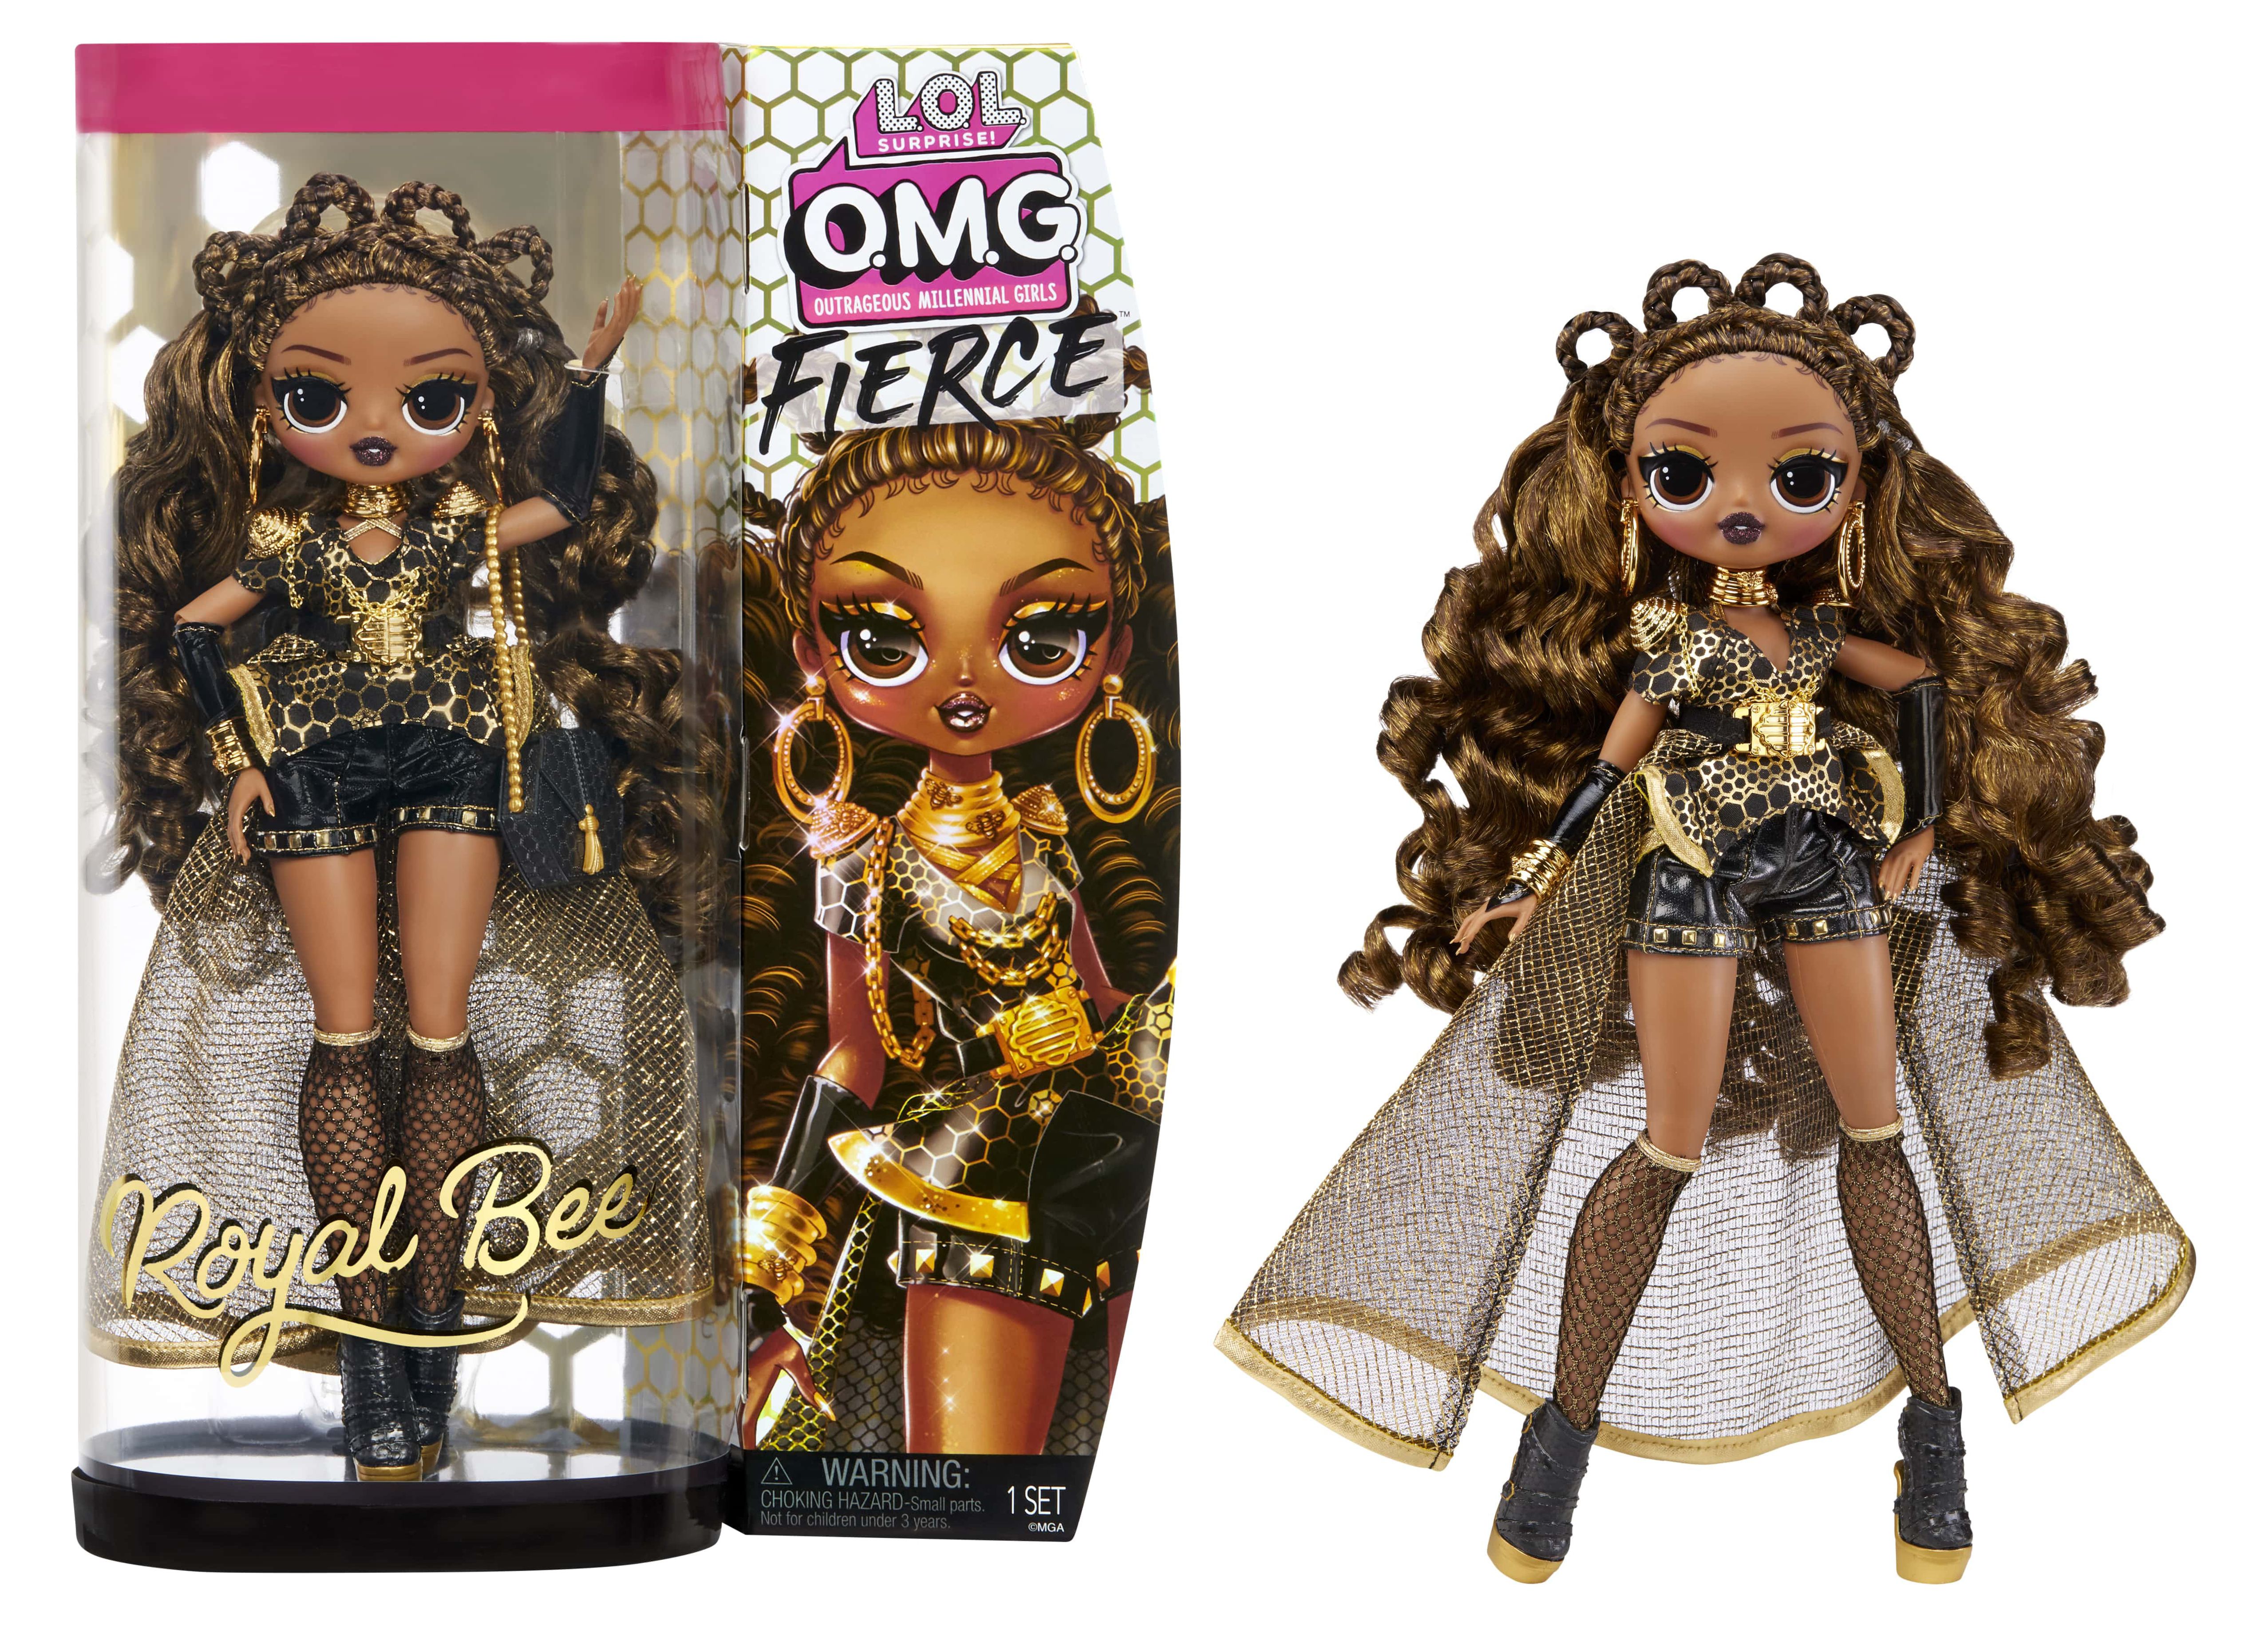 LOL Surprise OMG Fierce Royal Bee fashion doll with 15 Surprises